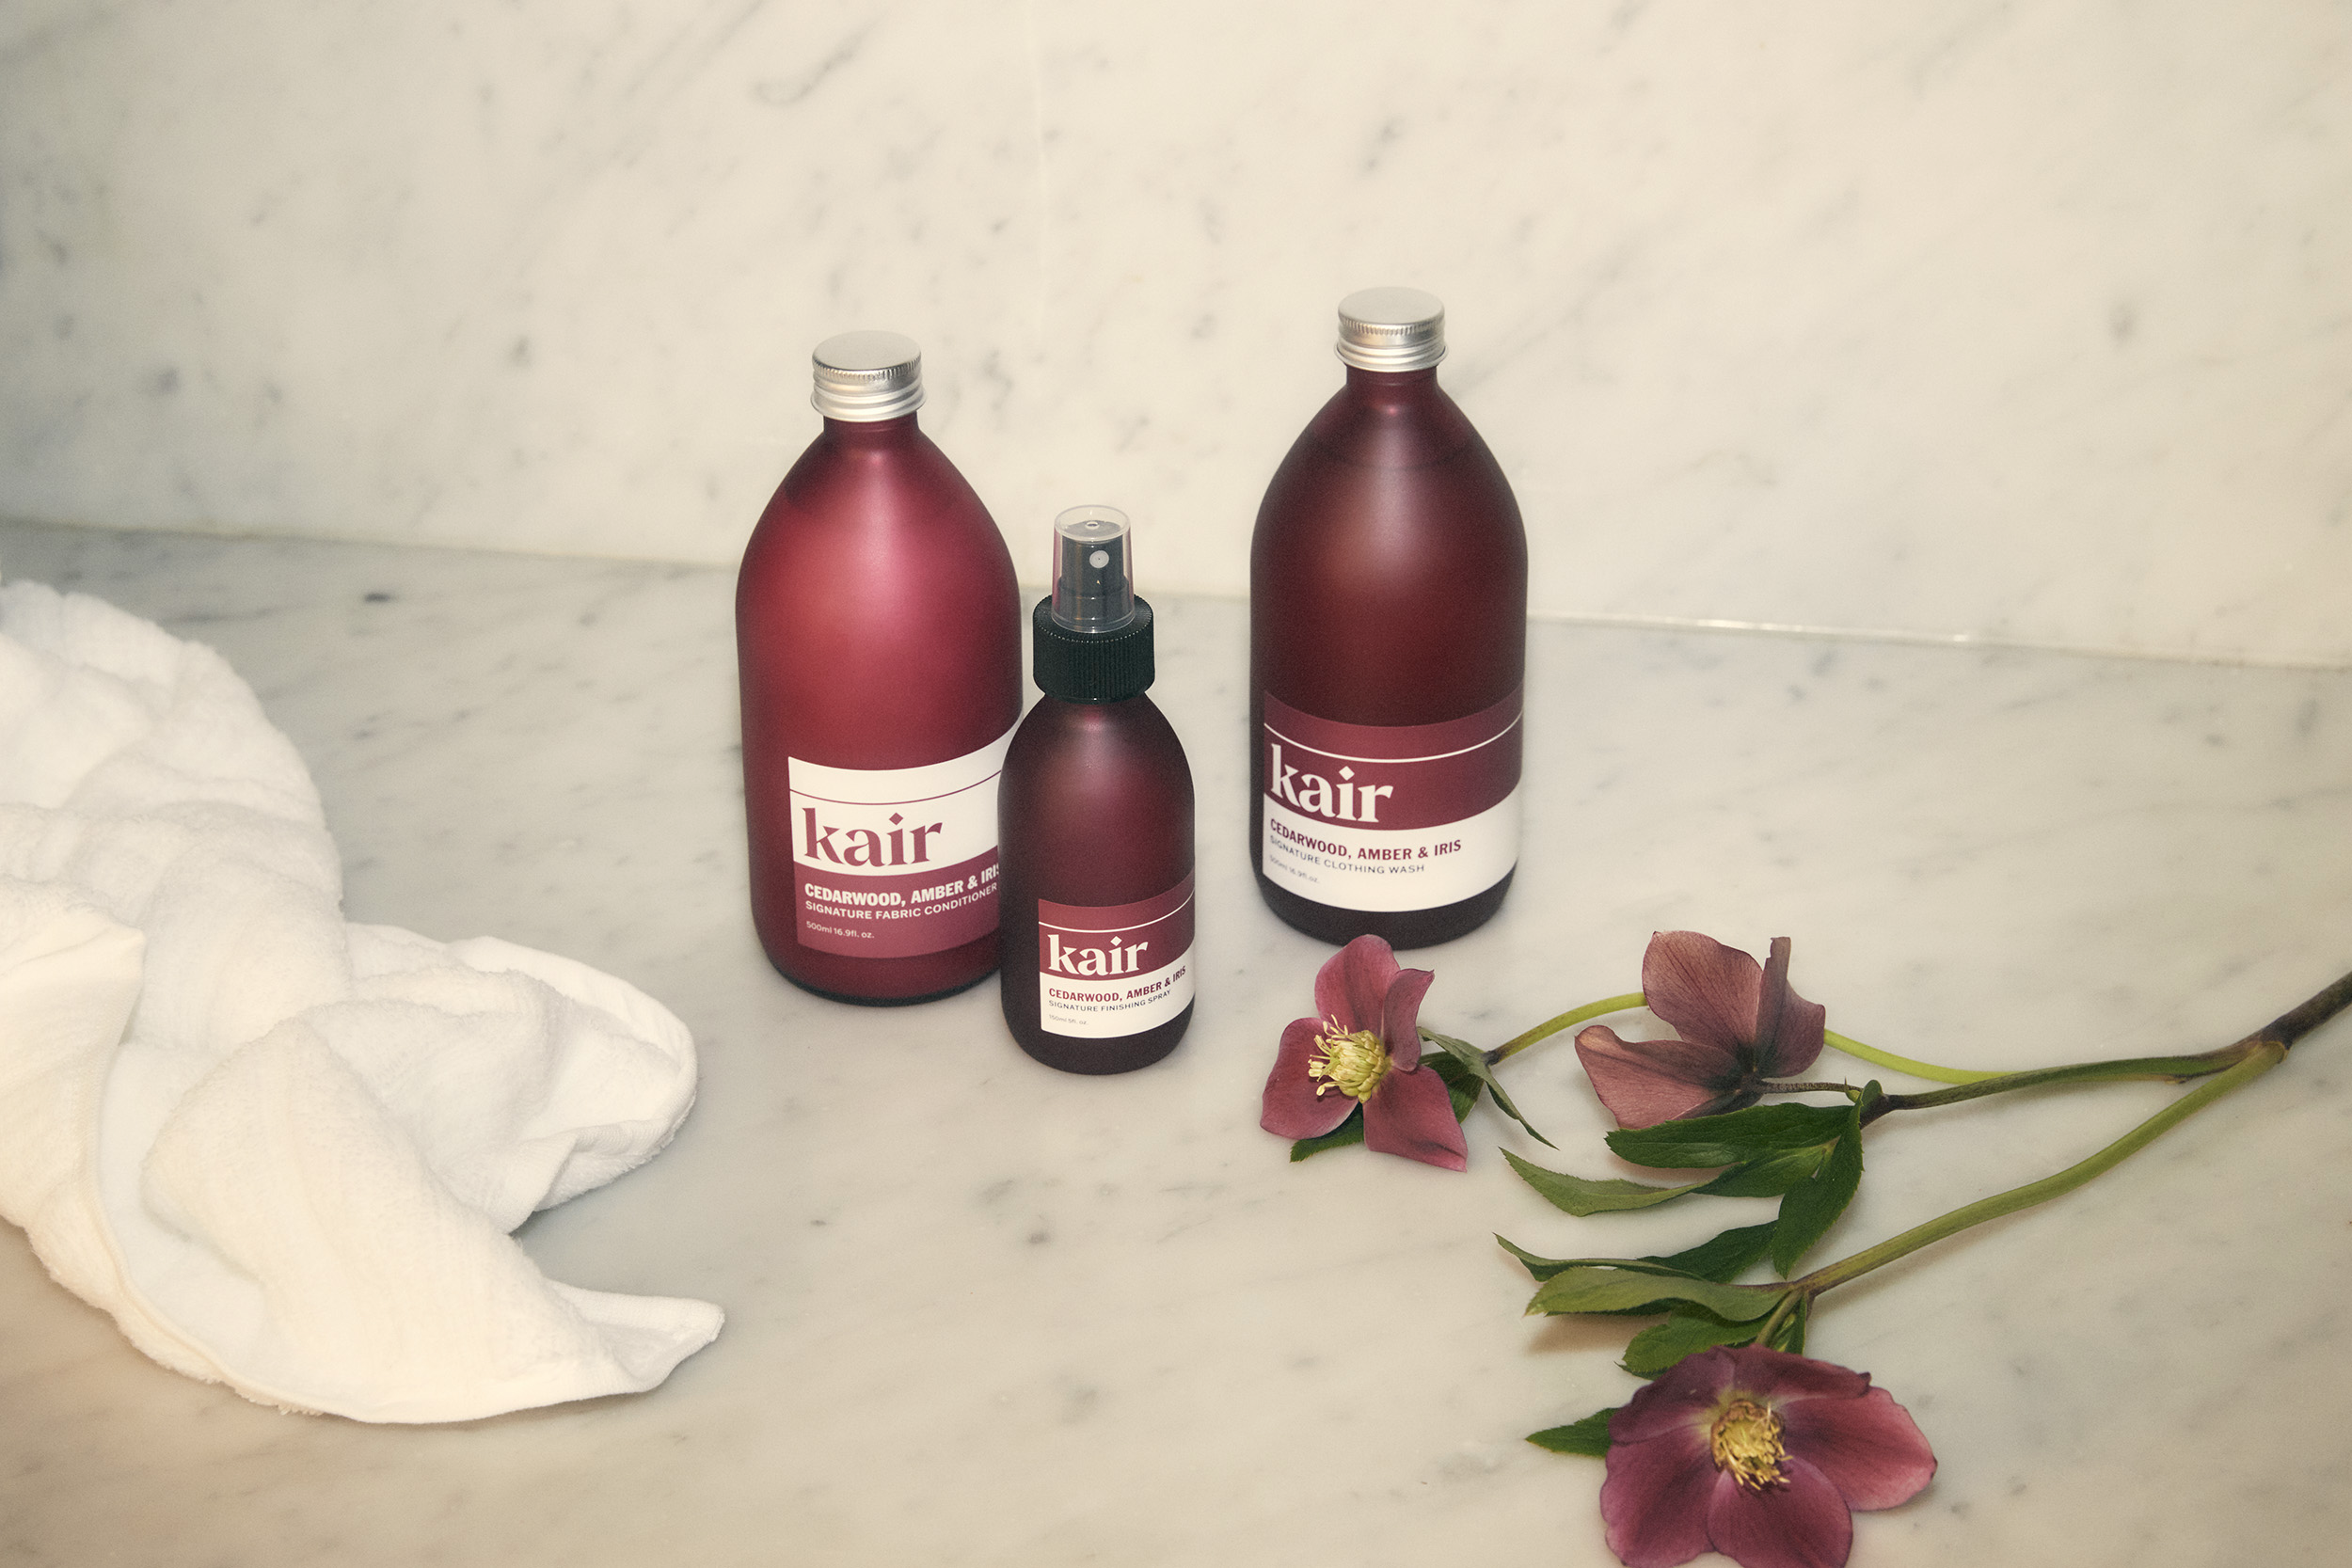 Photo showing Kair's Cedarwood, Amber & Iris Clothing Wash, Conditioner and spray on a white marble background next to some white towels and a flower